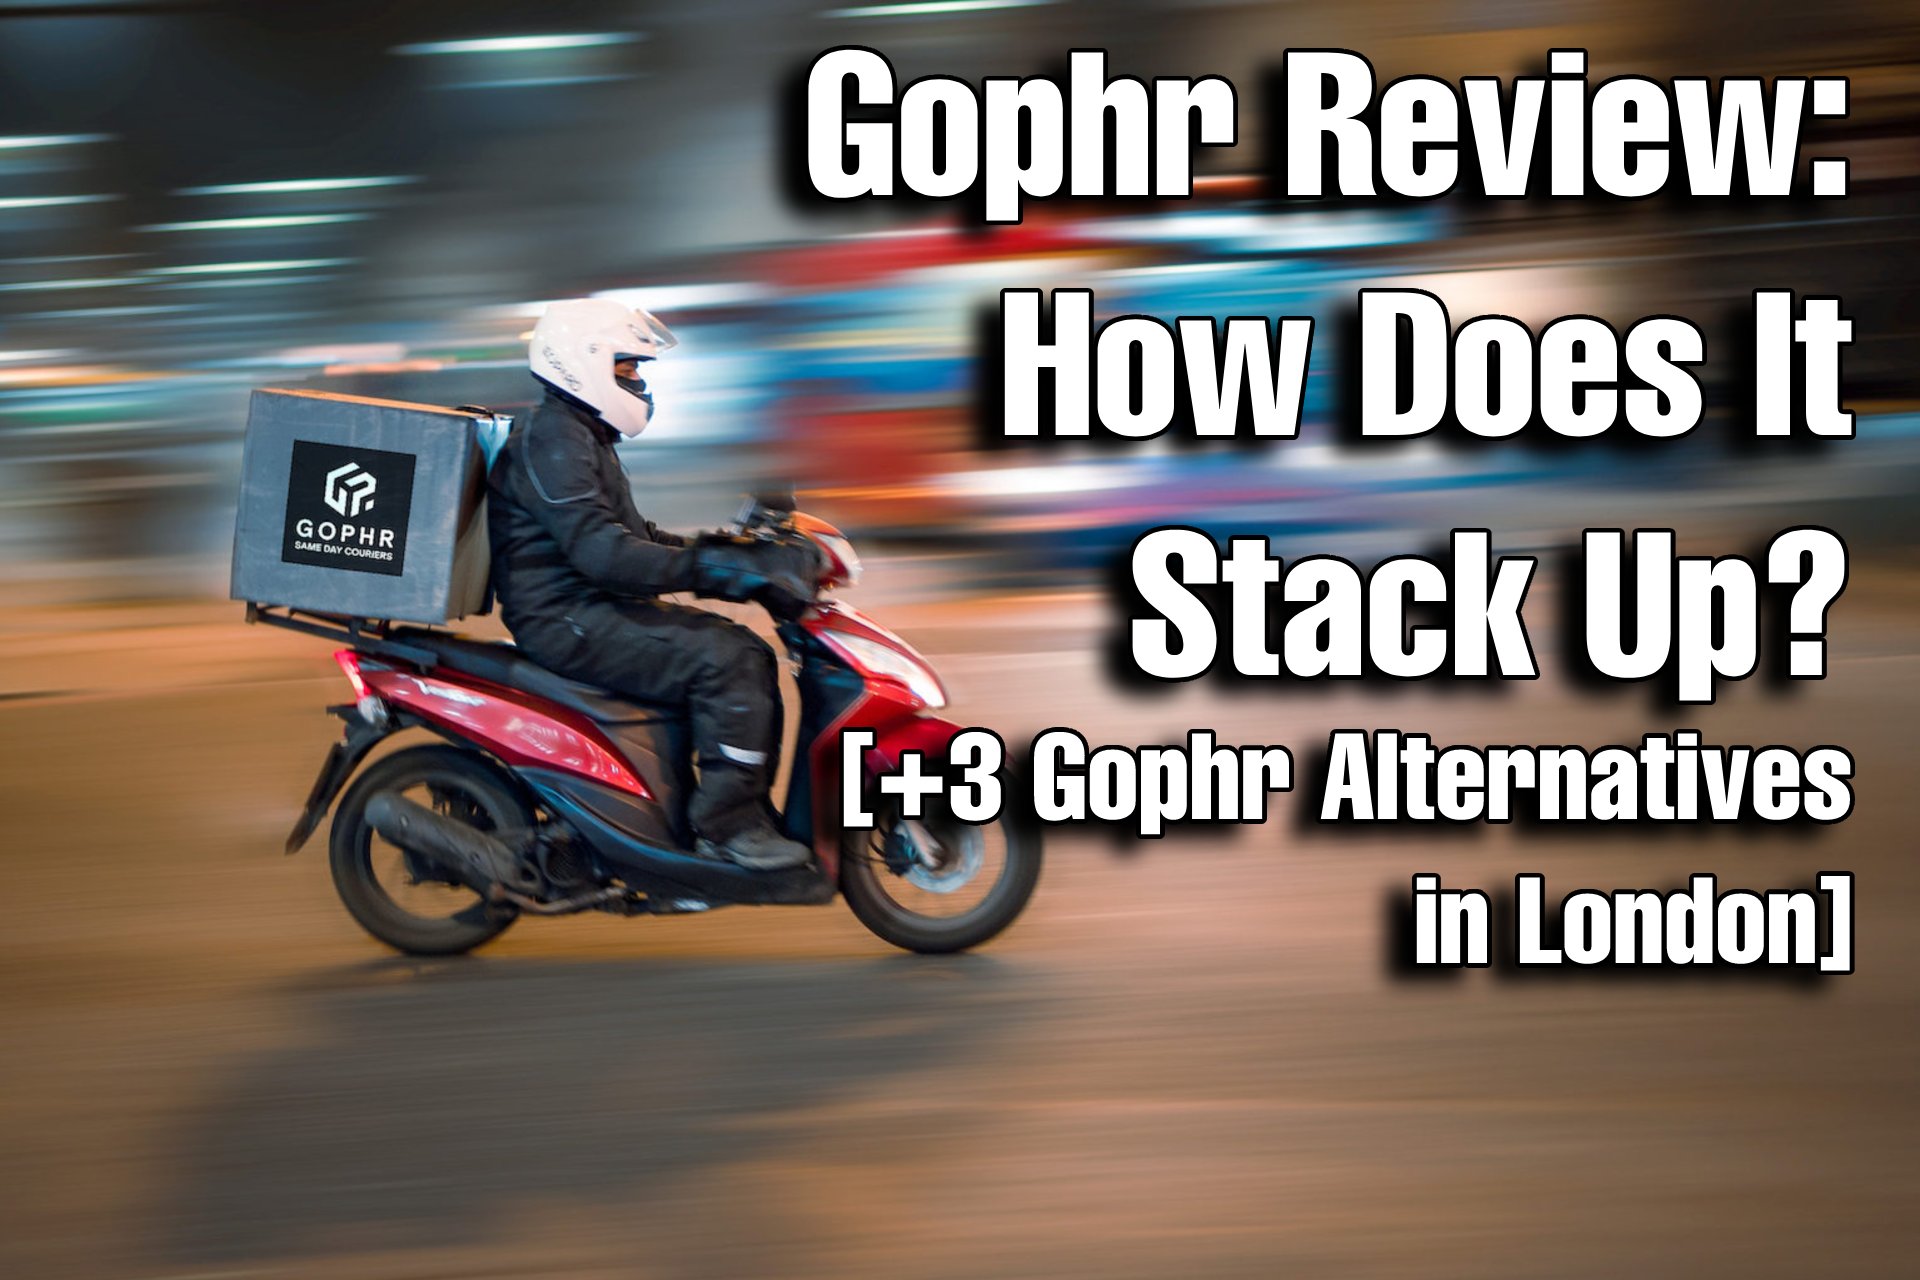 Gophr Review: How Does It Stack Up? [+3 Gophr Alternatives in London]